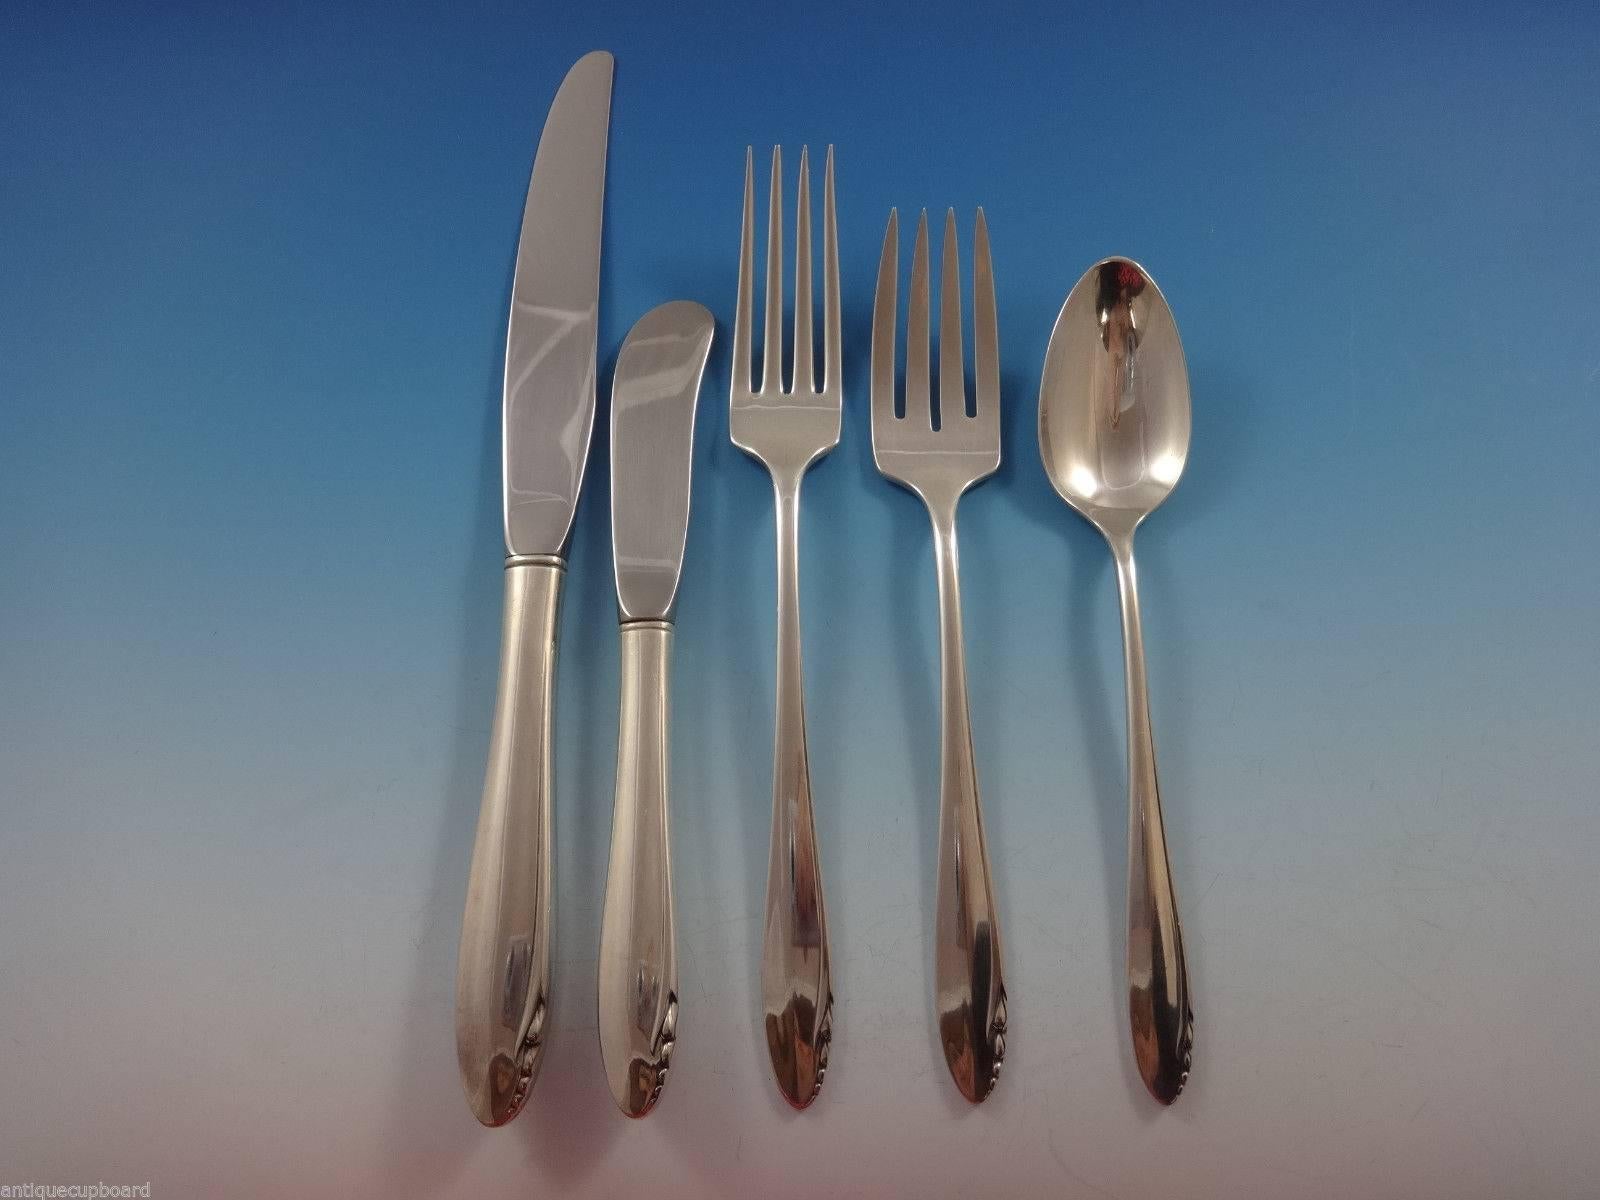 Lasting Spring by Oneida sterling silver flatware set of 63 pieces. This pattern has a simple, timeless, Mid-Century Modern design. This set includes:

12 knives, 8 7/8